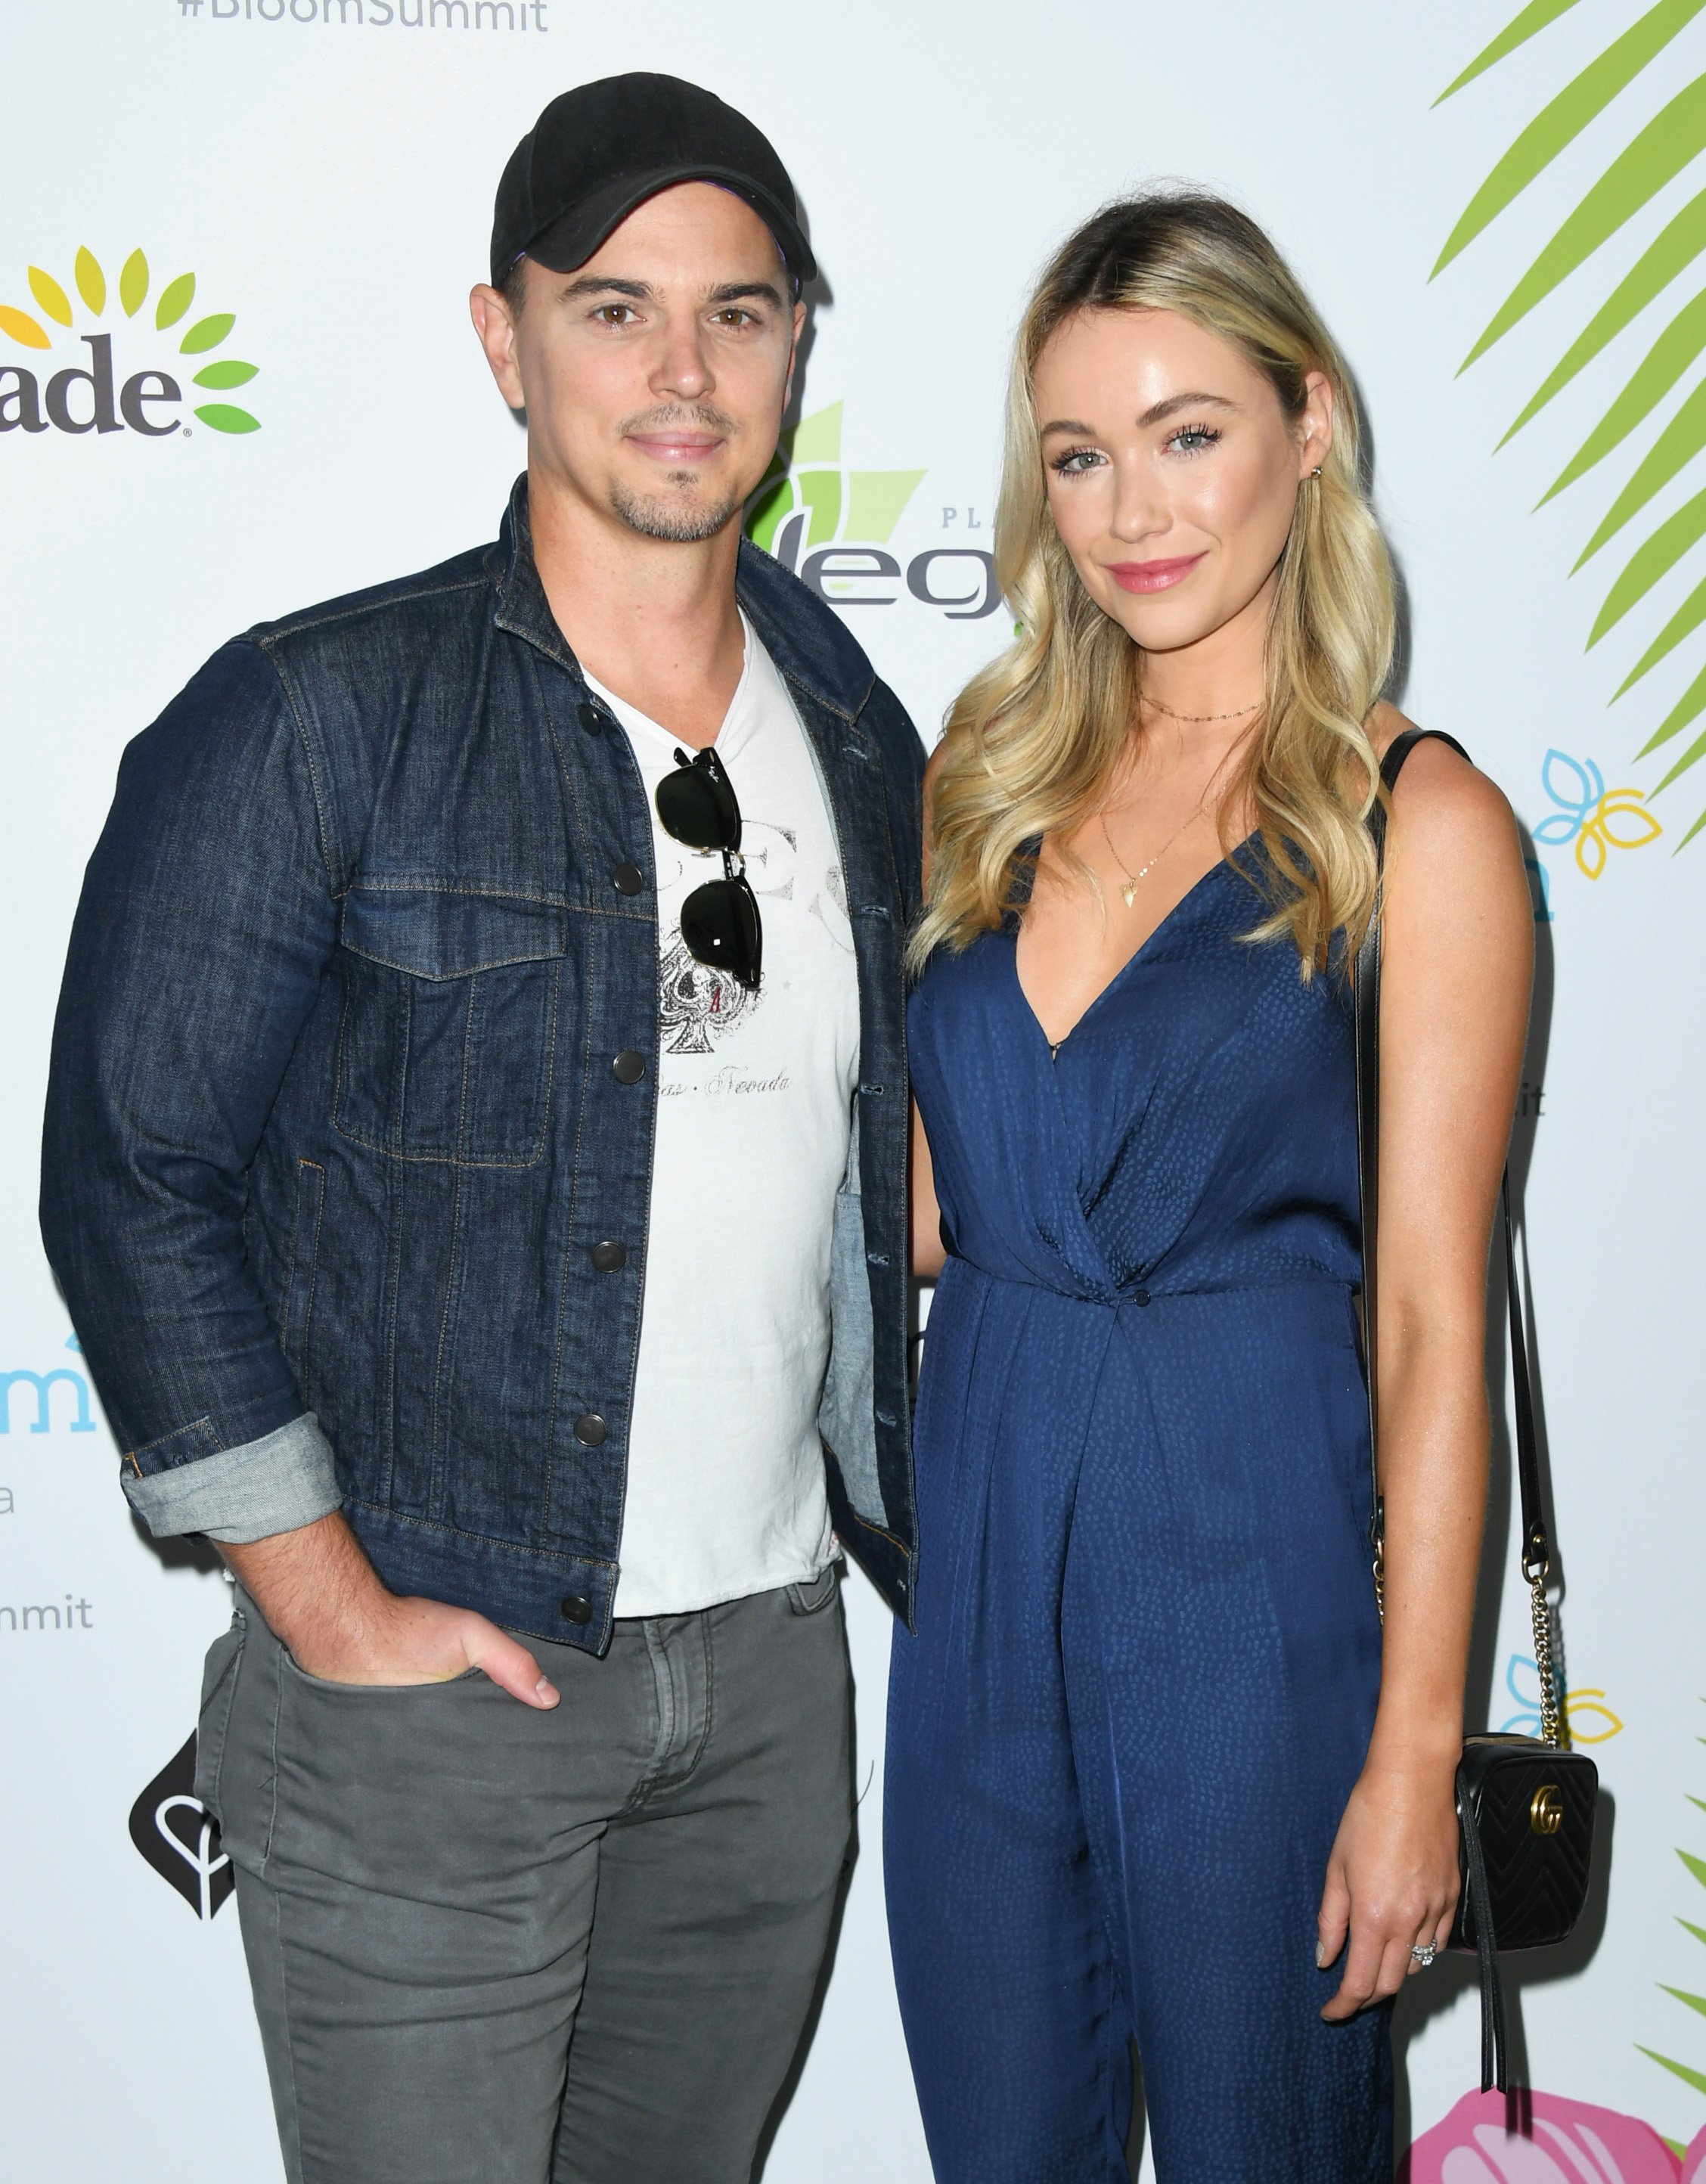 'The Bold and the Beautiful' actor Darin Brooks in a denim jacket and hat; and Katrina Bowden in a blue jumpsuit.